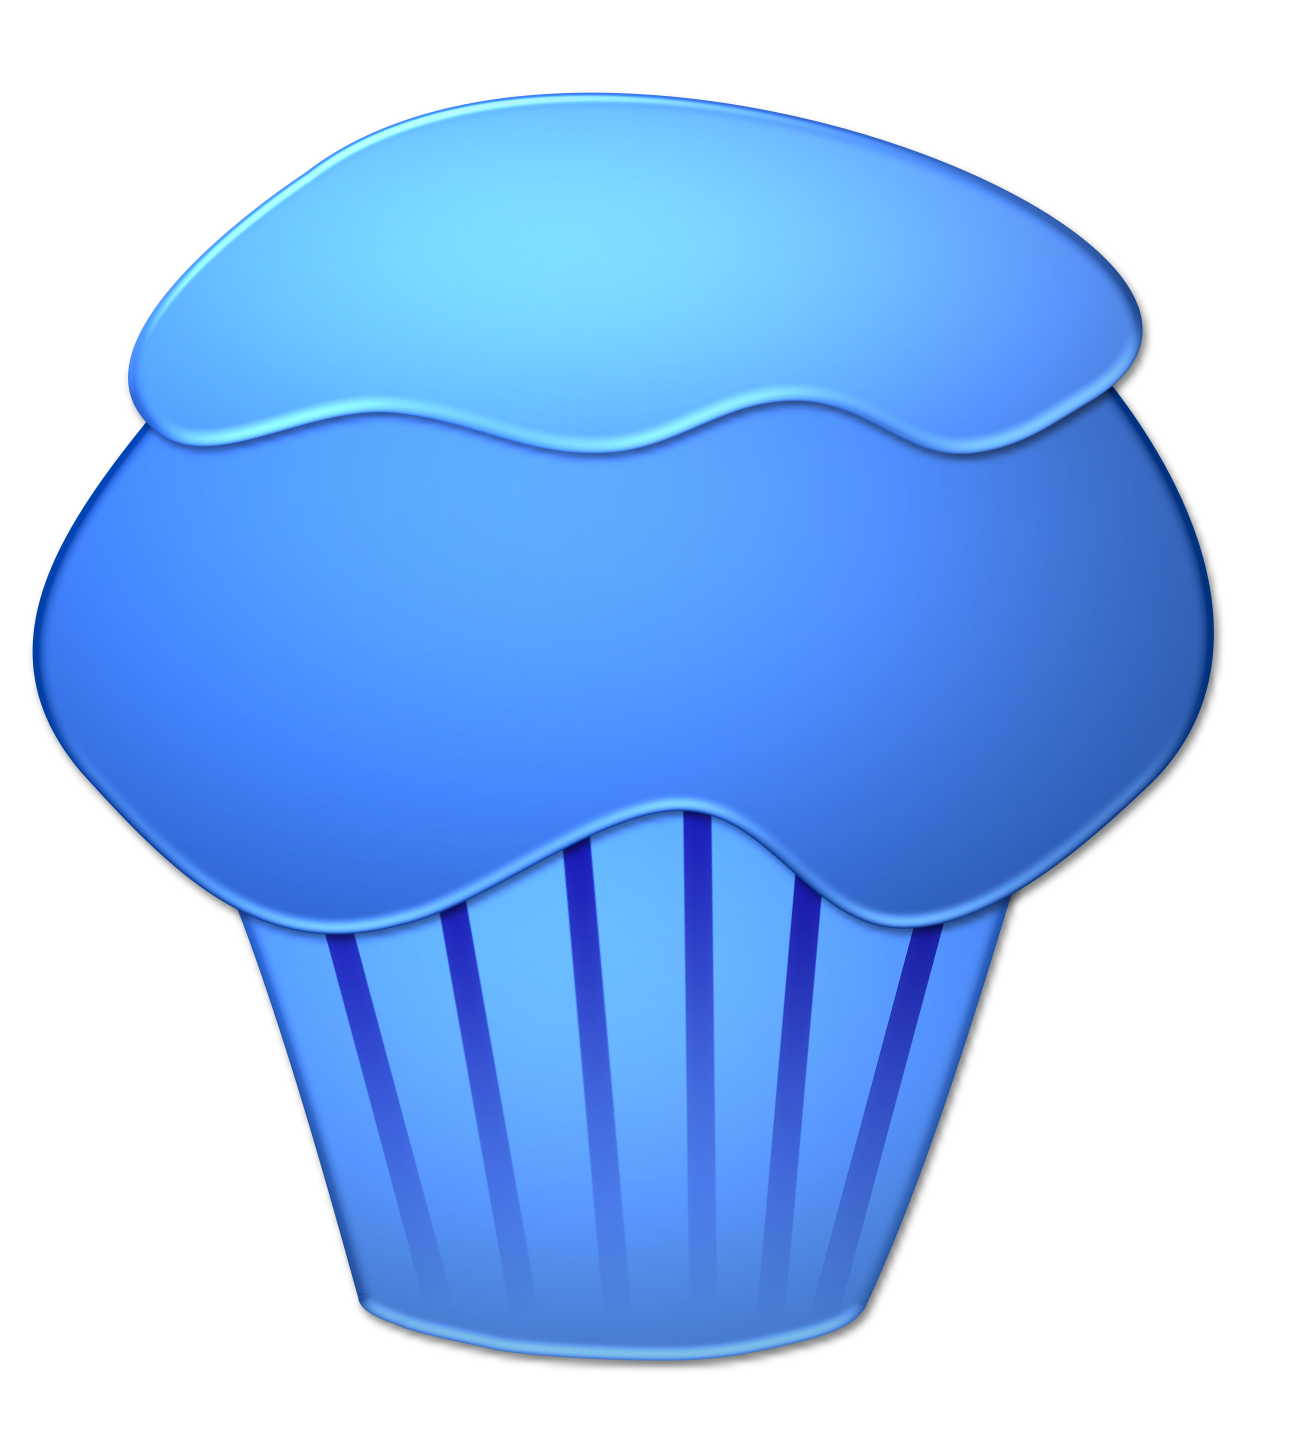 Blue Cupcakes Clipart Blueberry Cupcake Png